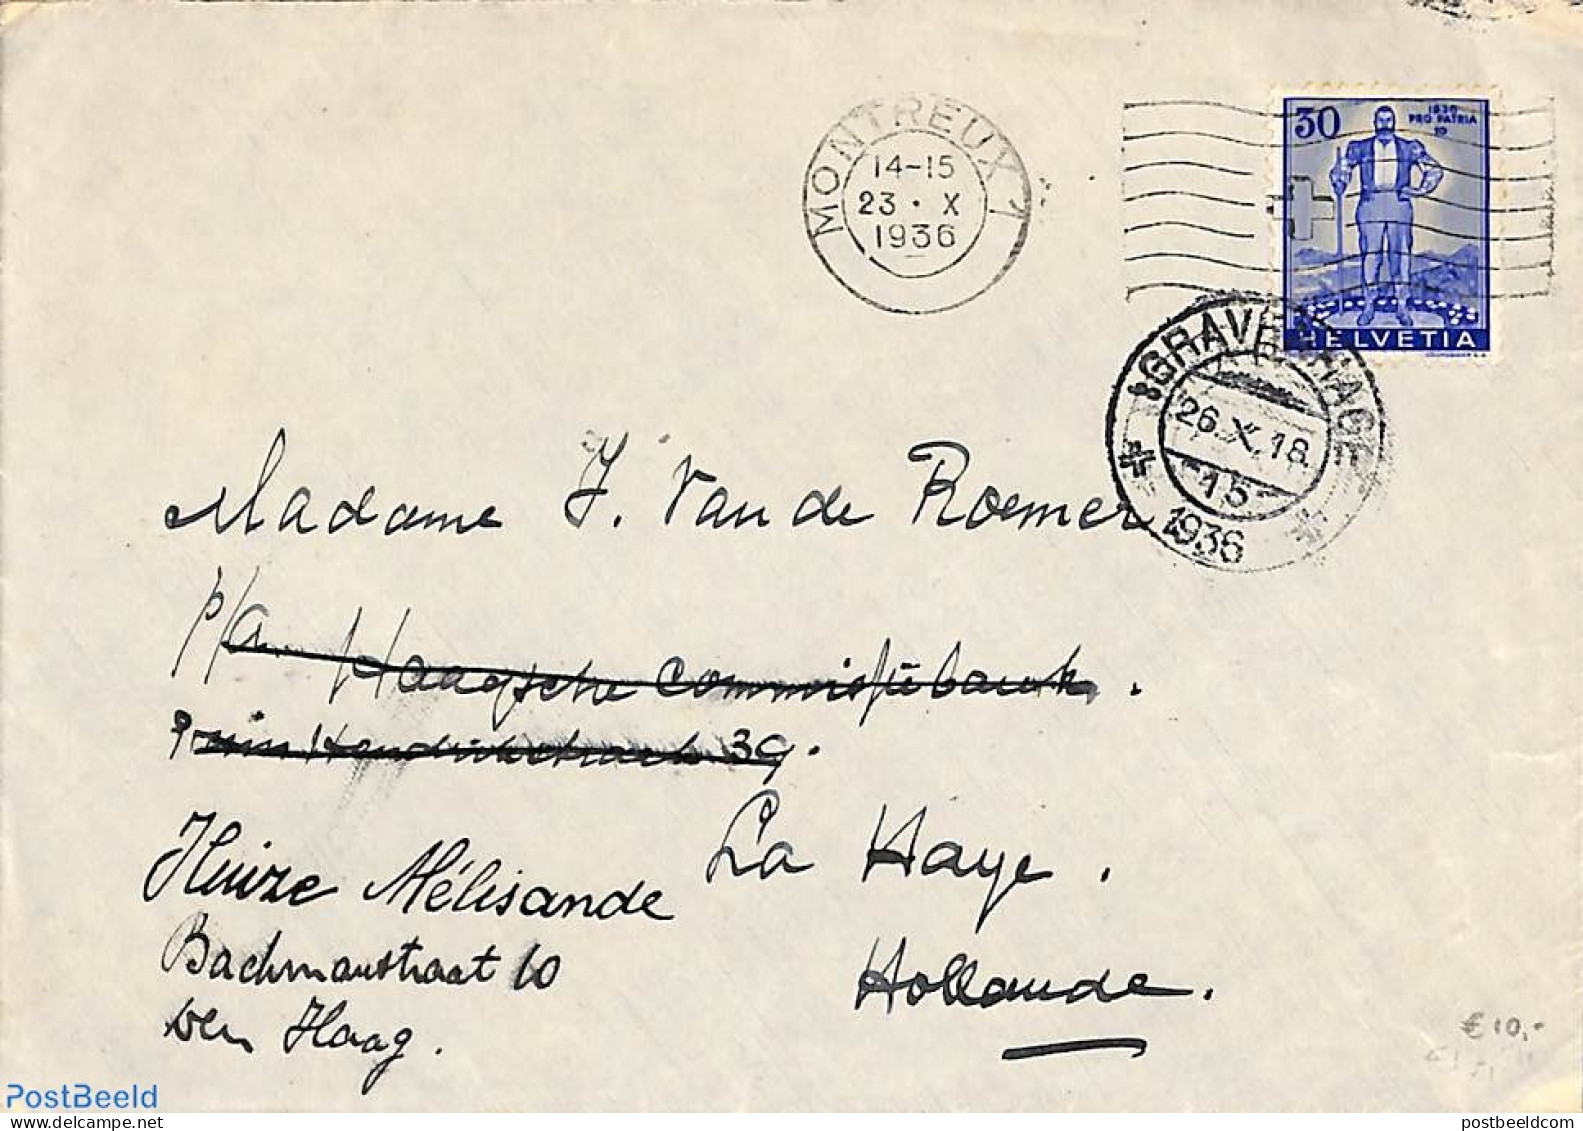 Switzerland 1936 Envelope From Monsteaux To The Hague , Postal History - Lettres & Documents